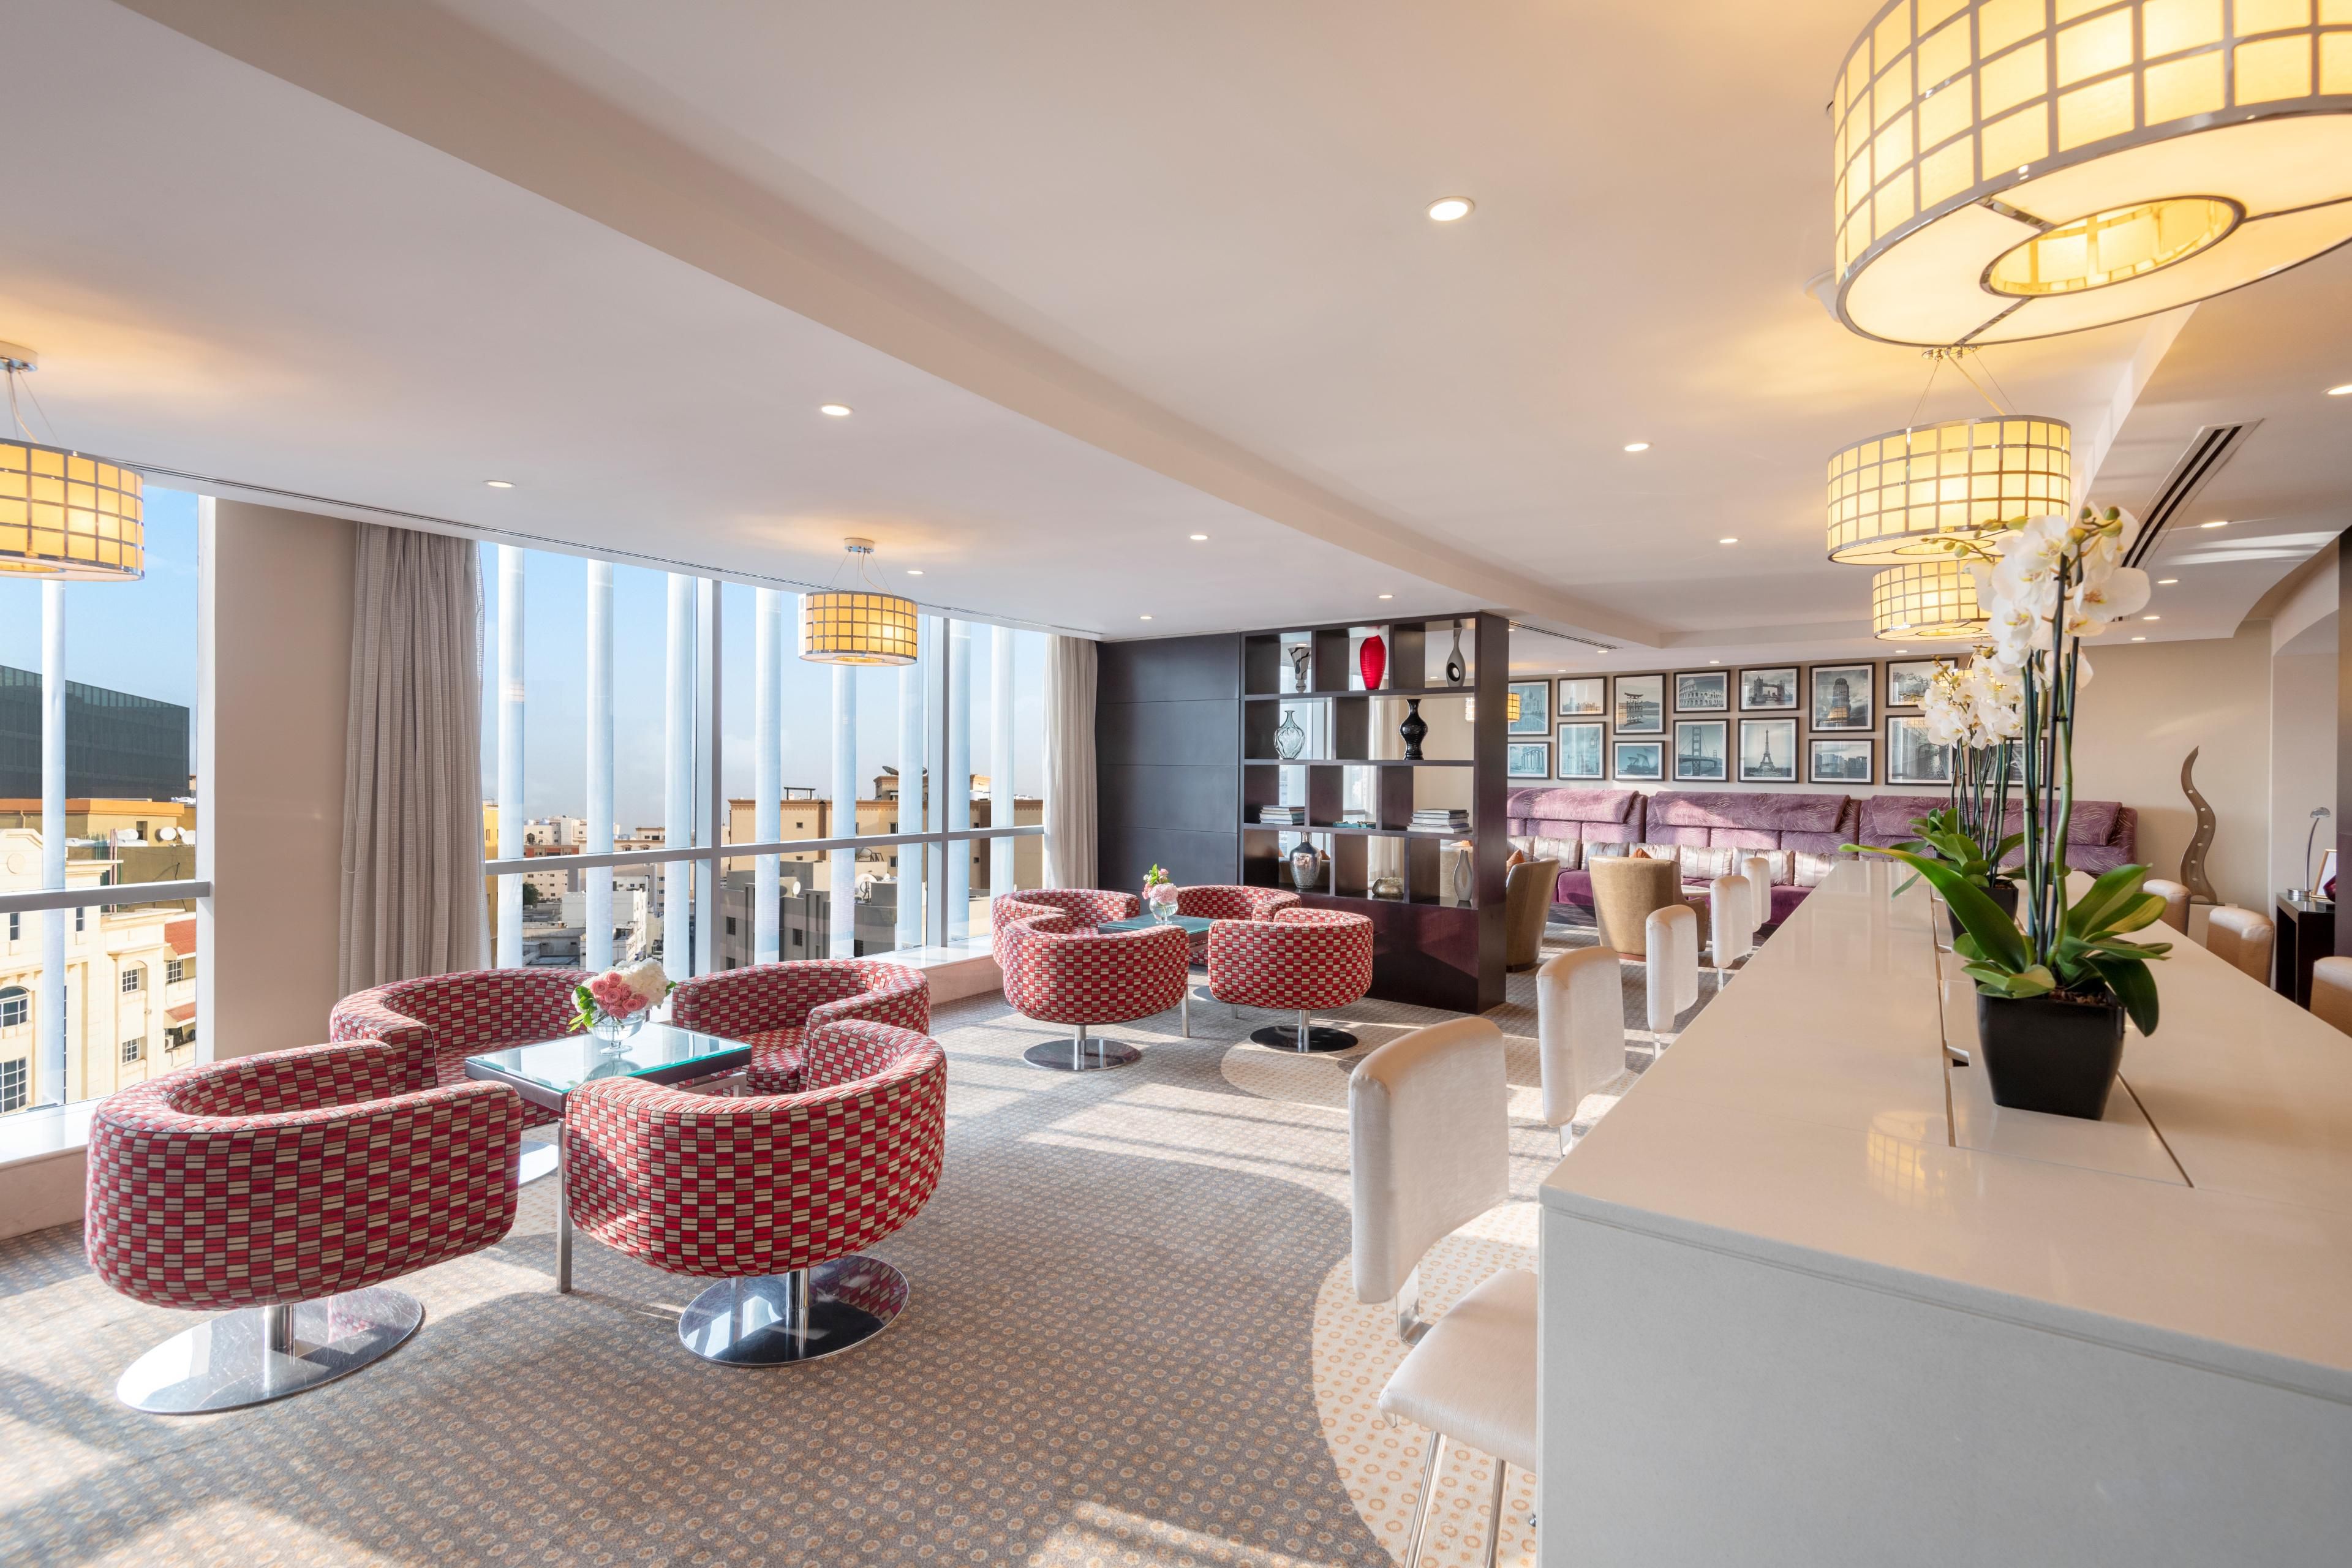 Relax, refresh or do business in style in our stylish Club Lounge